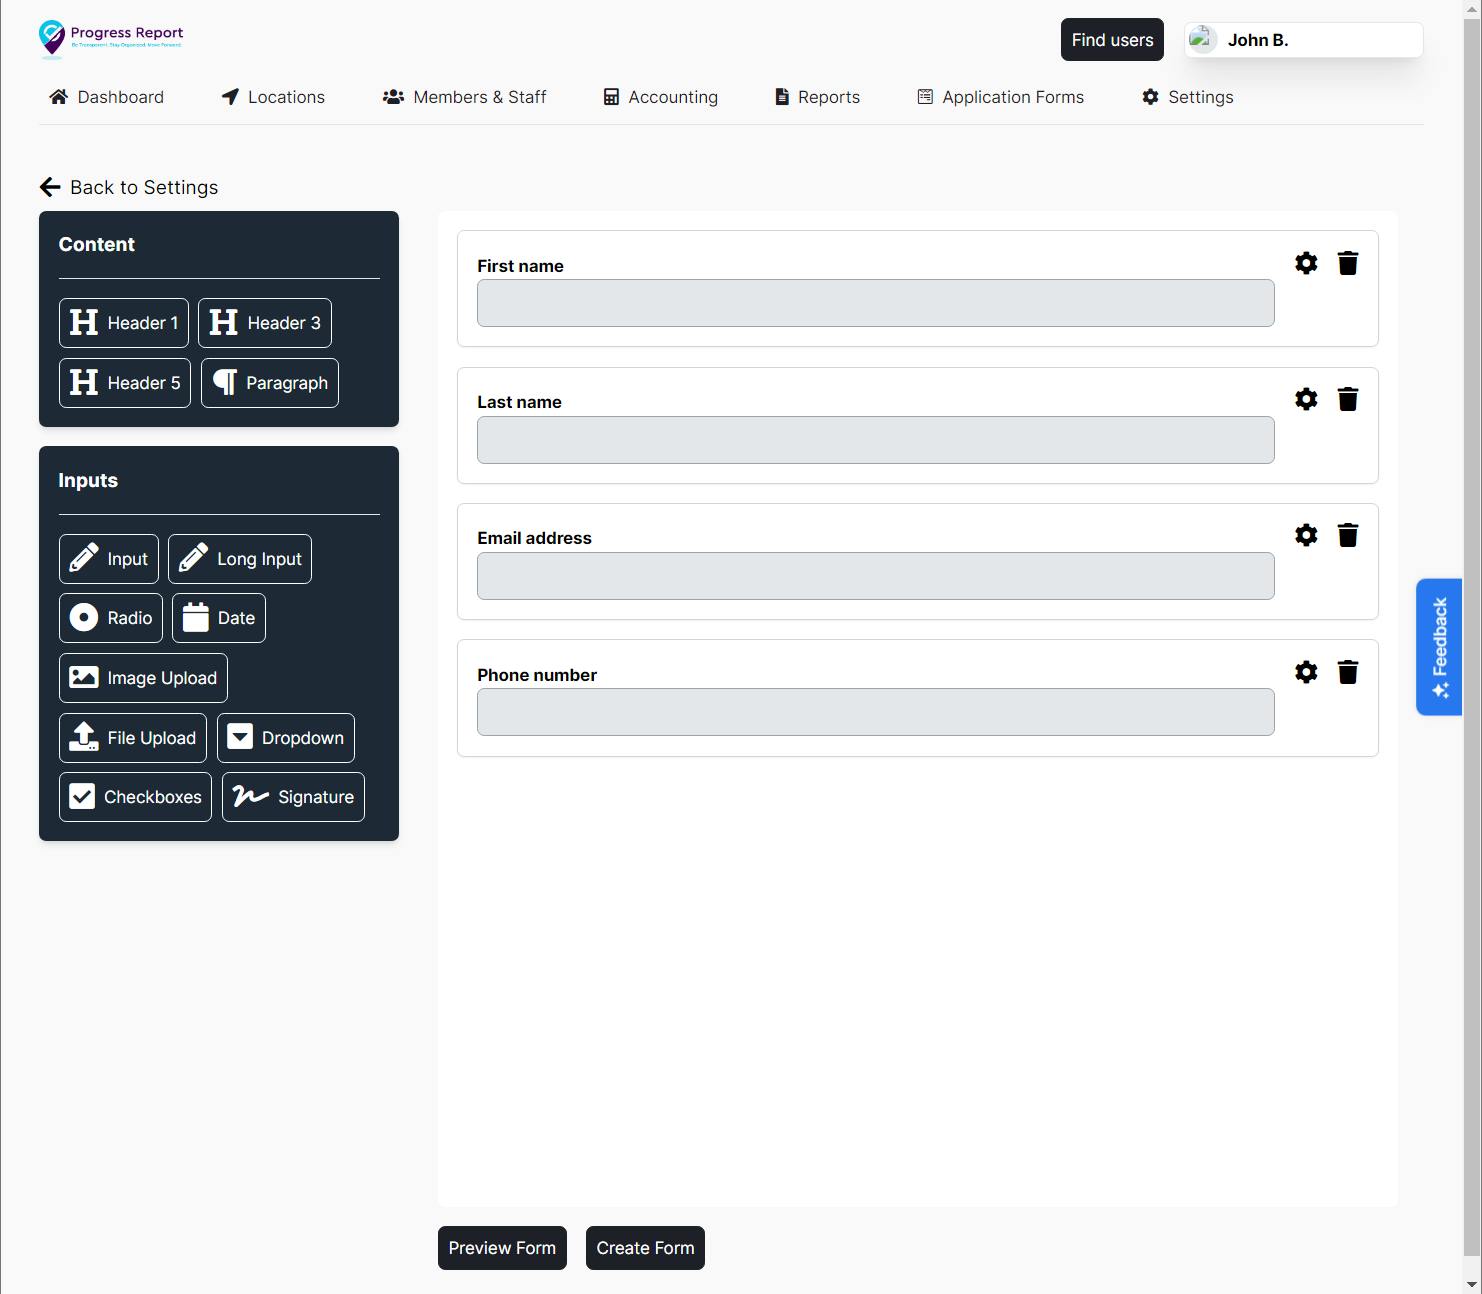 New Application Form built with Progress Report Form Builder web interface